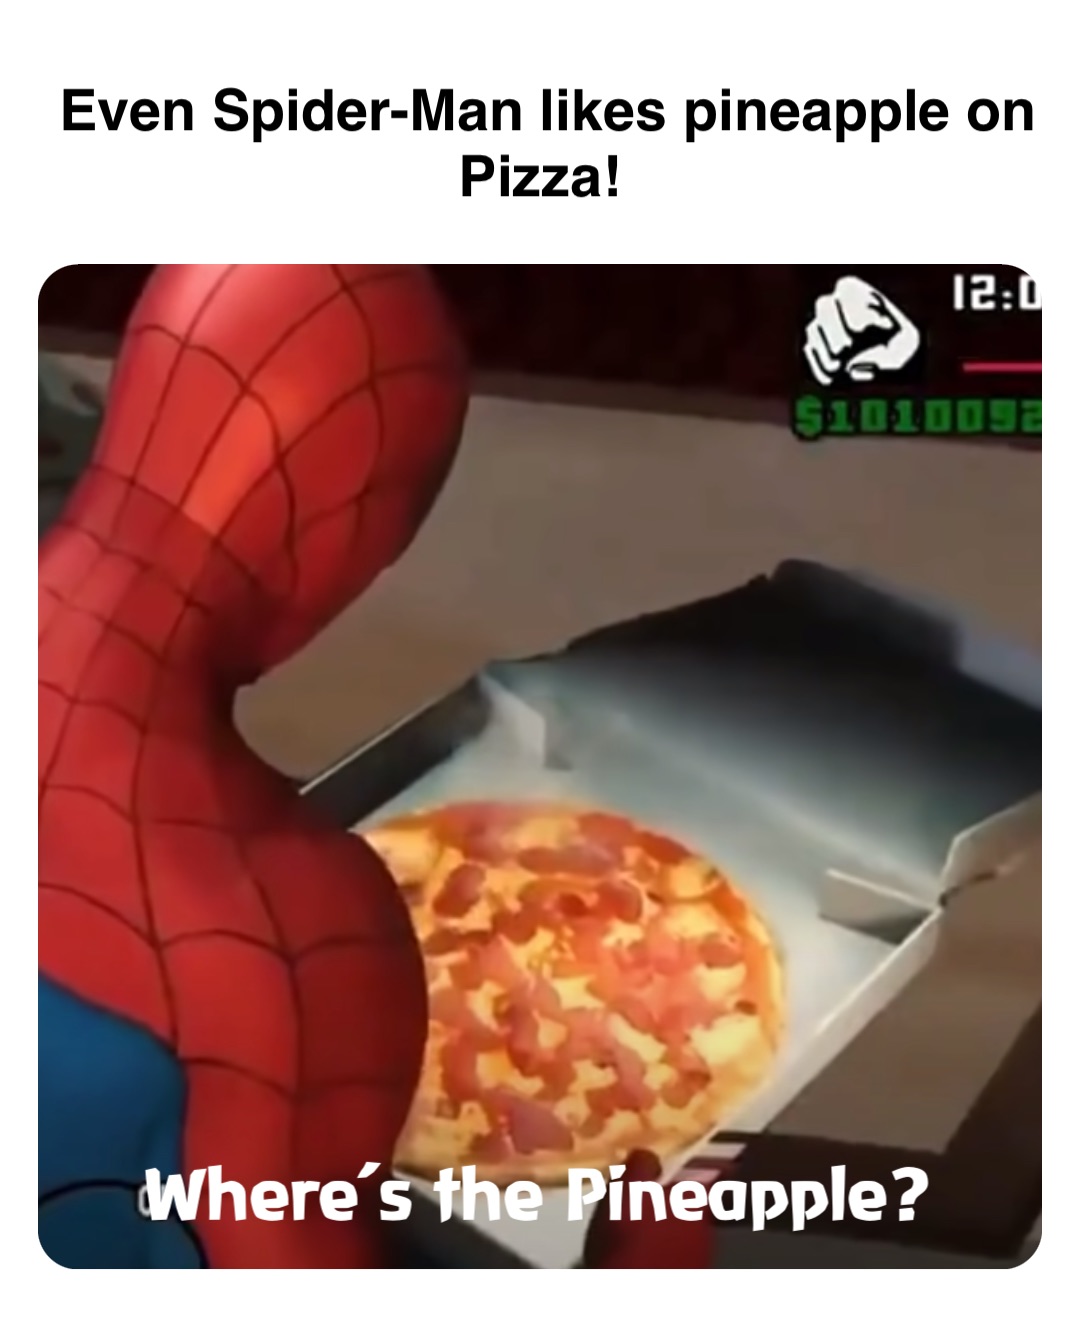 Even Spider-Man likes pineapple on Pizza! Where’s the Pineapple?